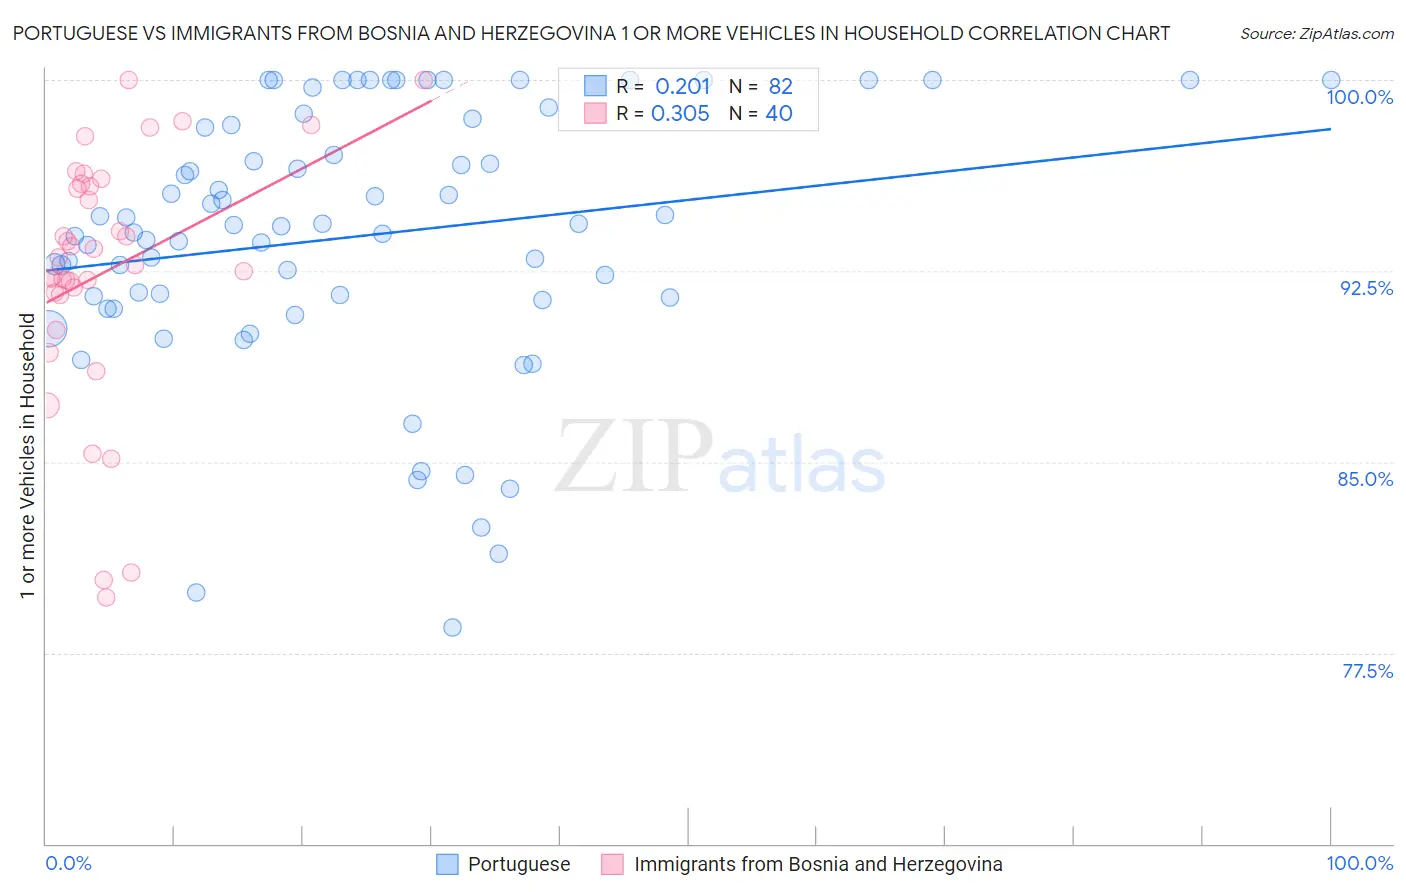 Portuguese vs Immigrants from Bosnia and Herzegovina 1 or more Vehicles in Household